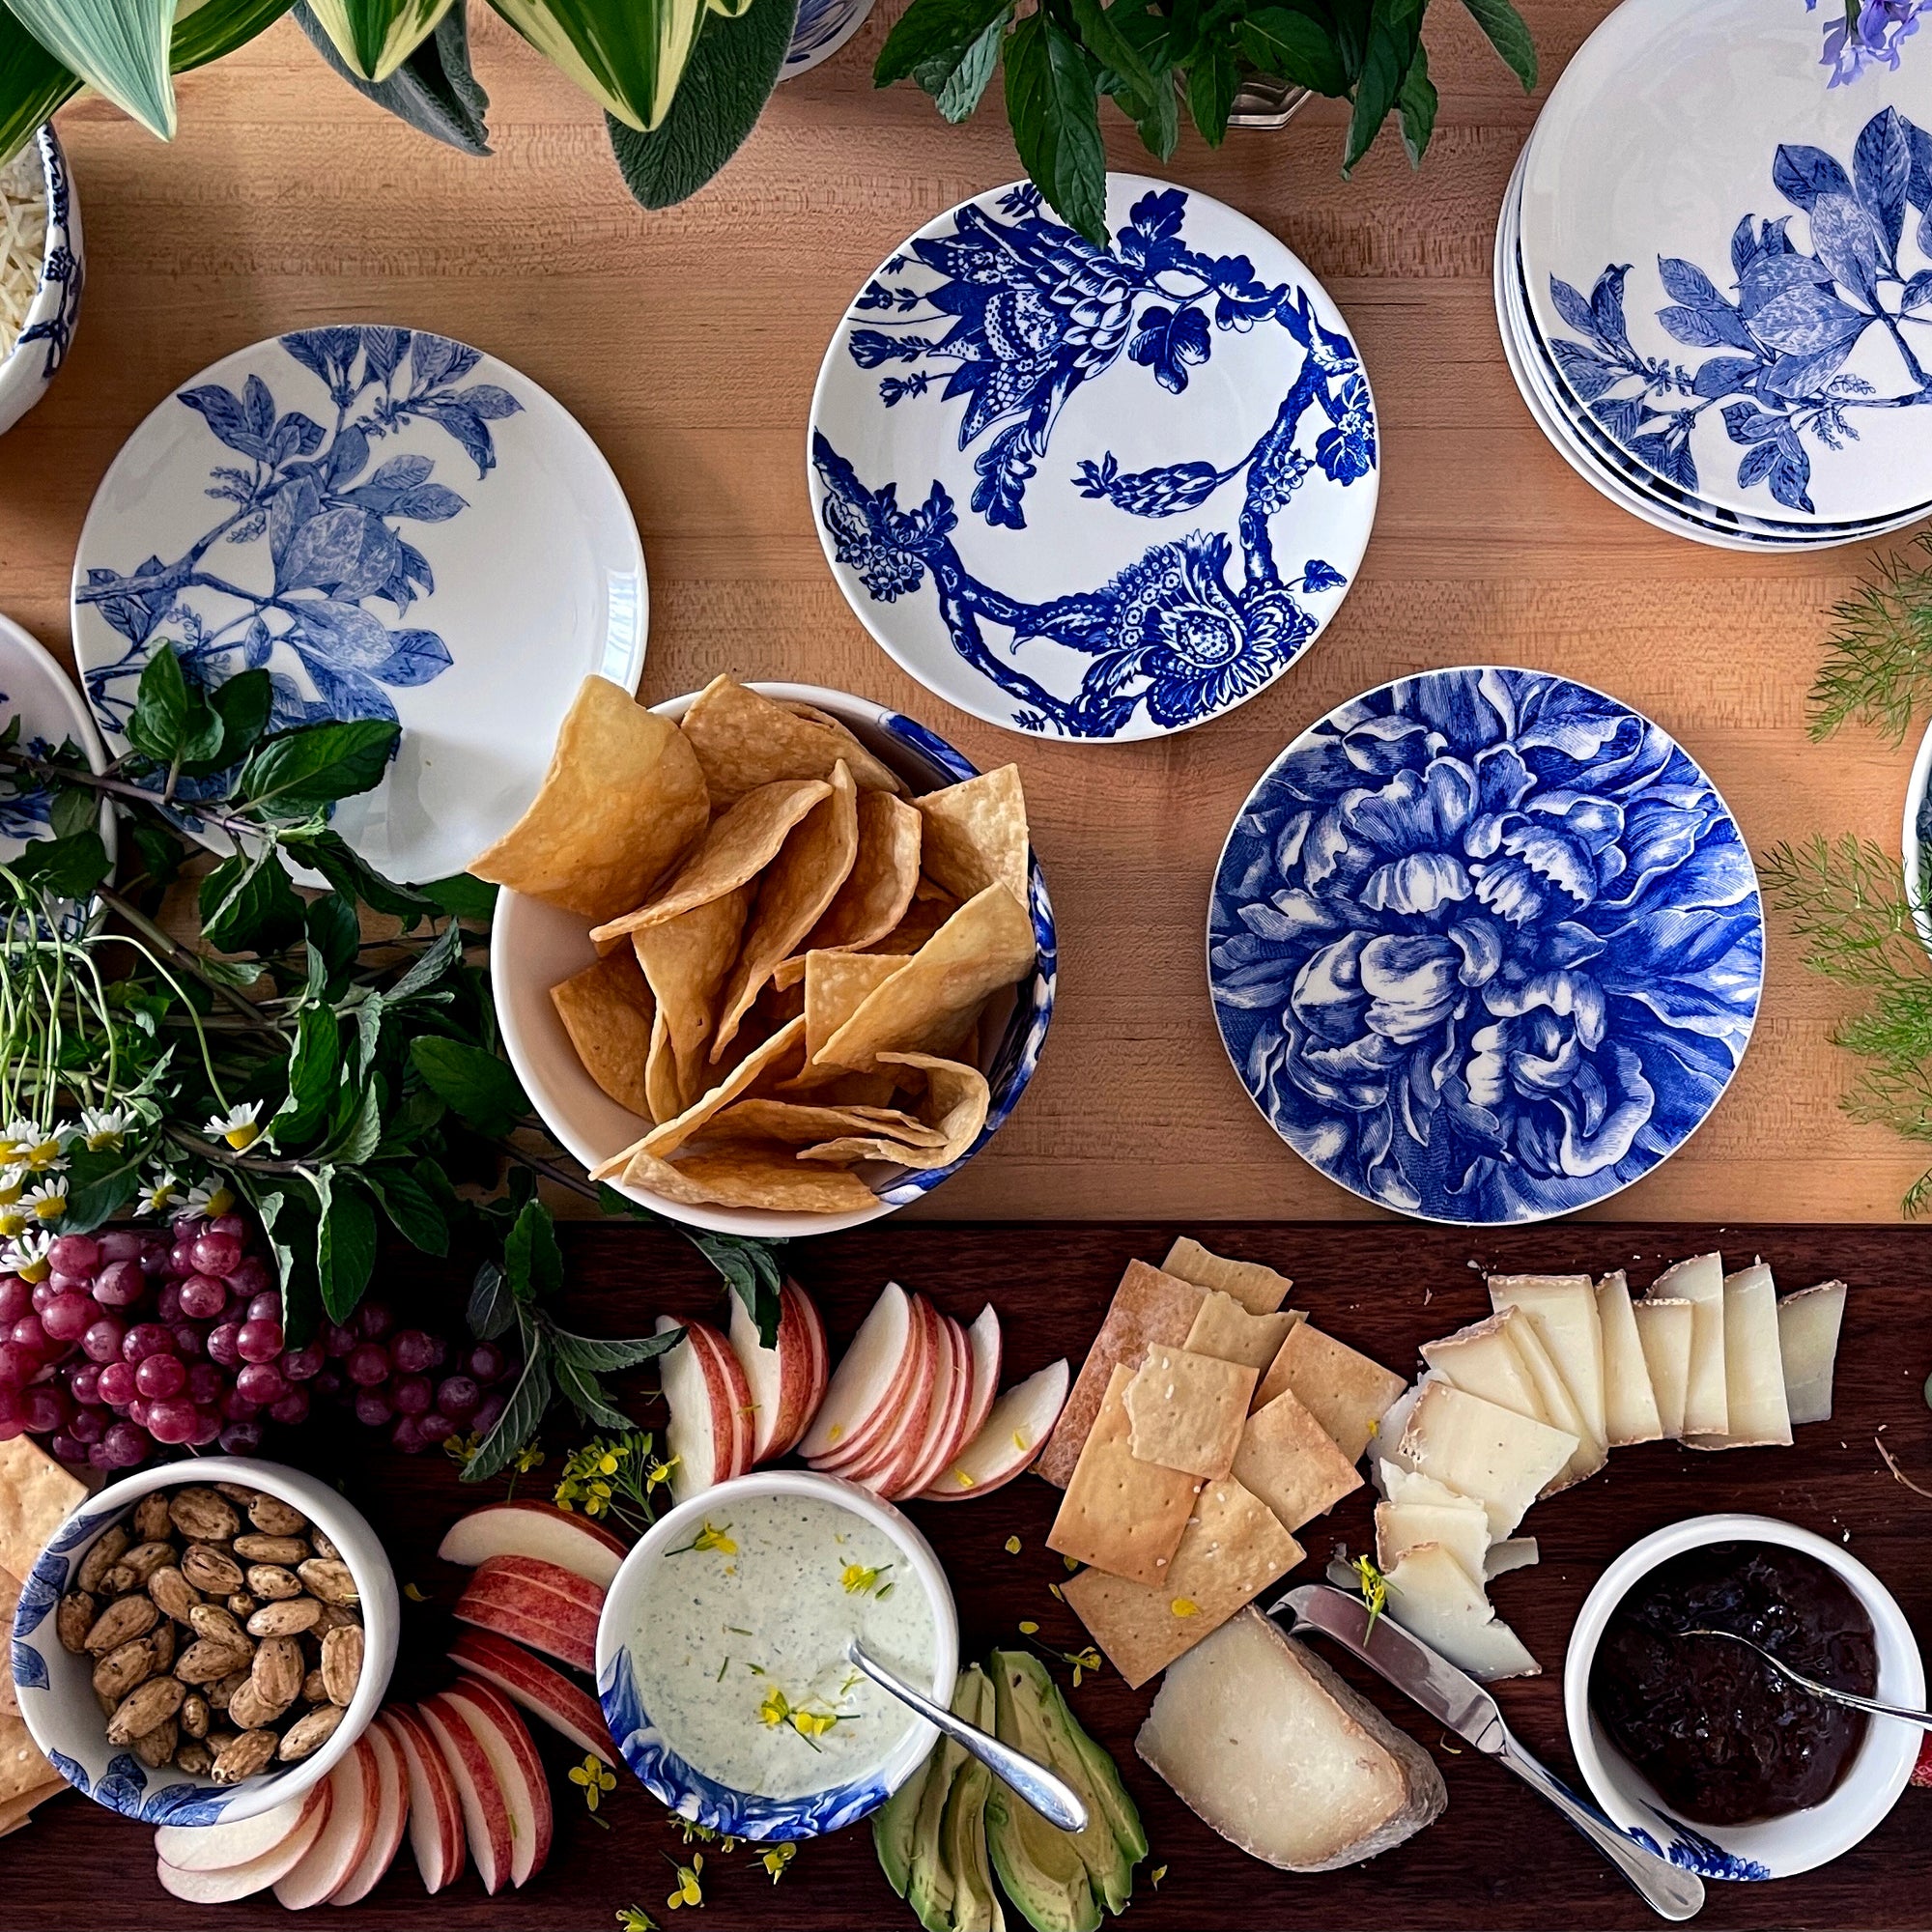 Here's a collection of our best-selling botanical and floral dinnerware in blue and white porcelain, for mixing and matching from Caskata.